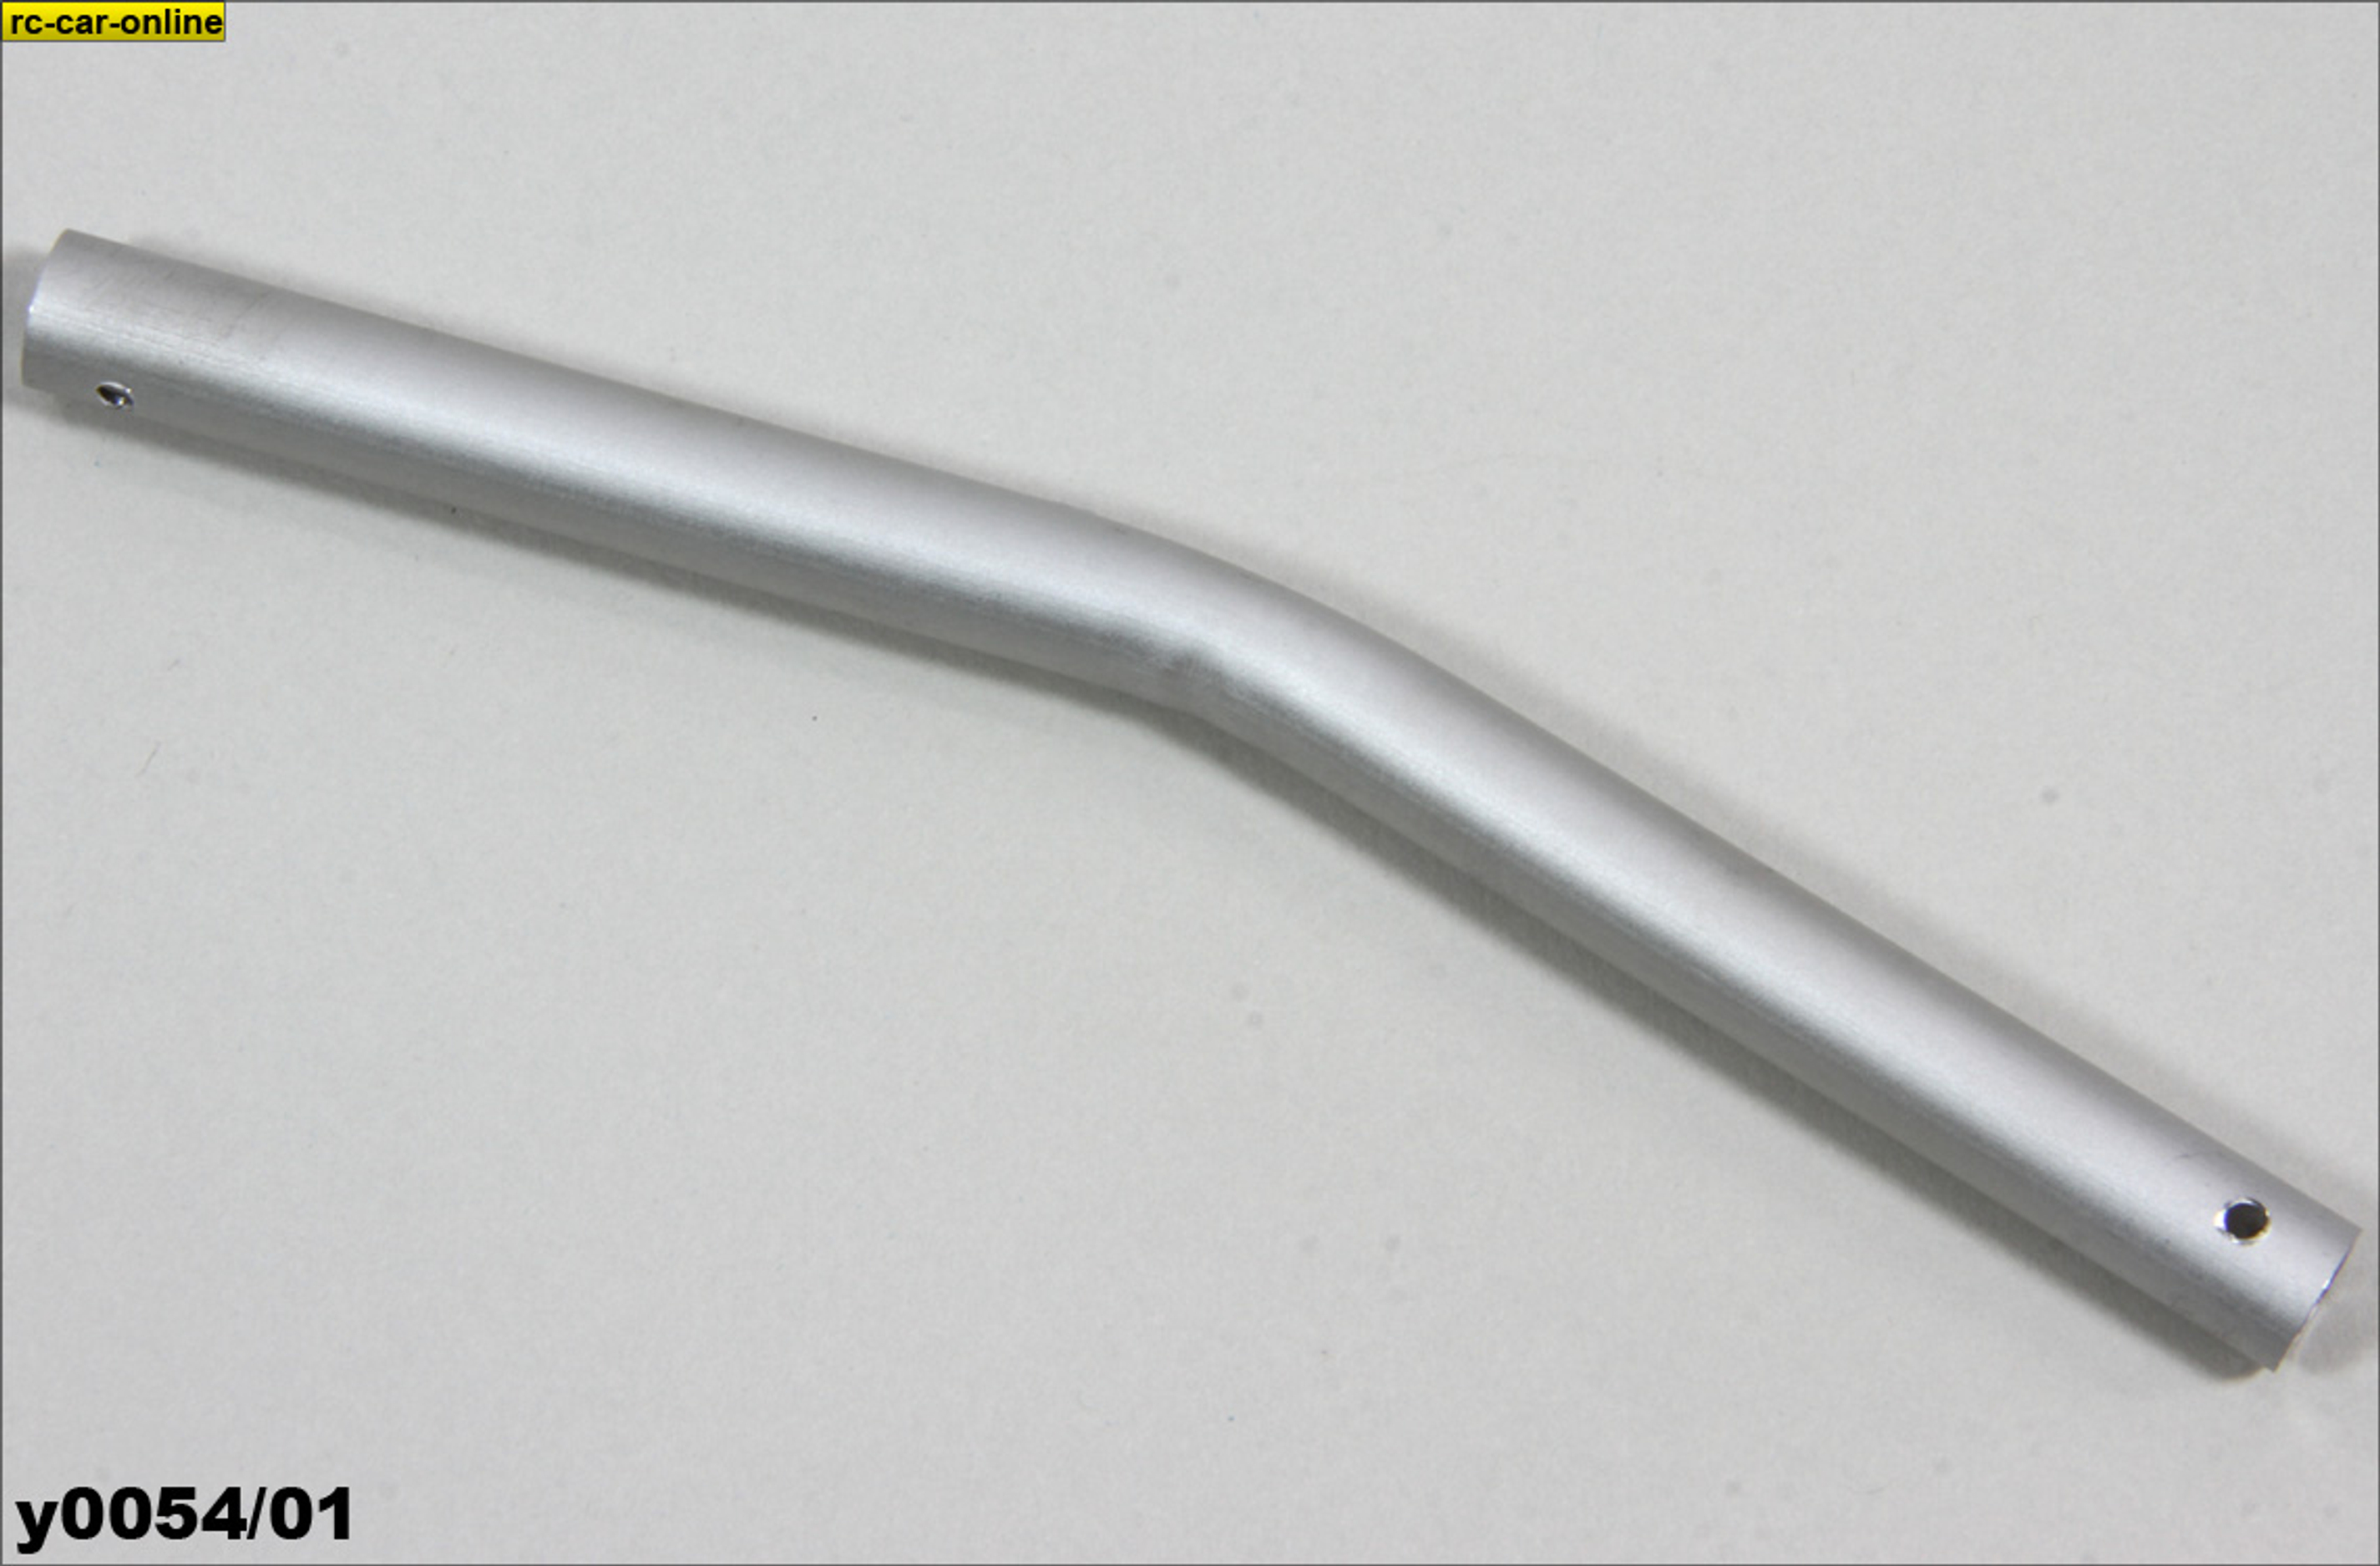 y0054 Aluminum struts for roll bars and miscellaneous applications, 1 pce.